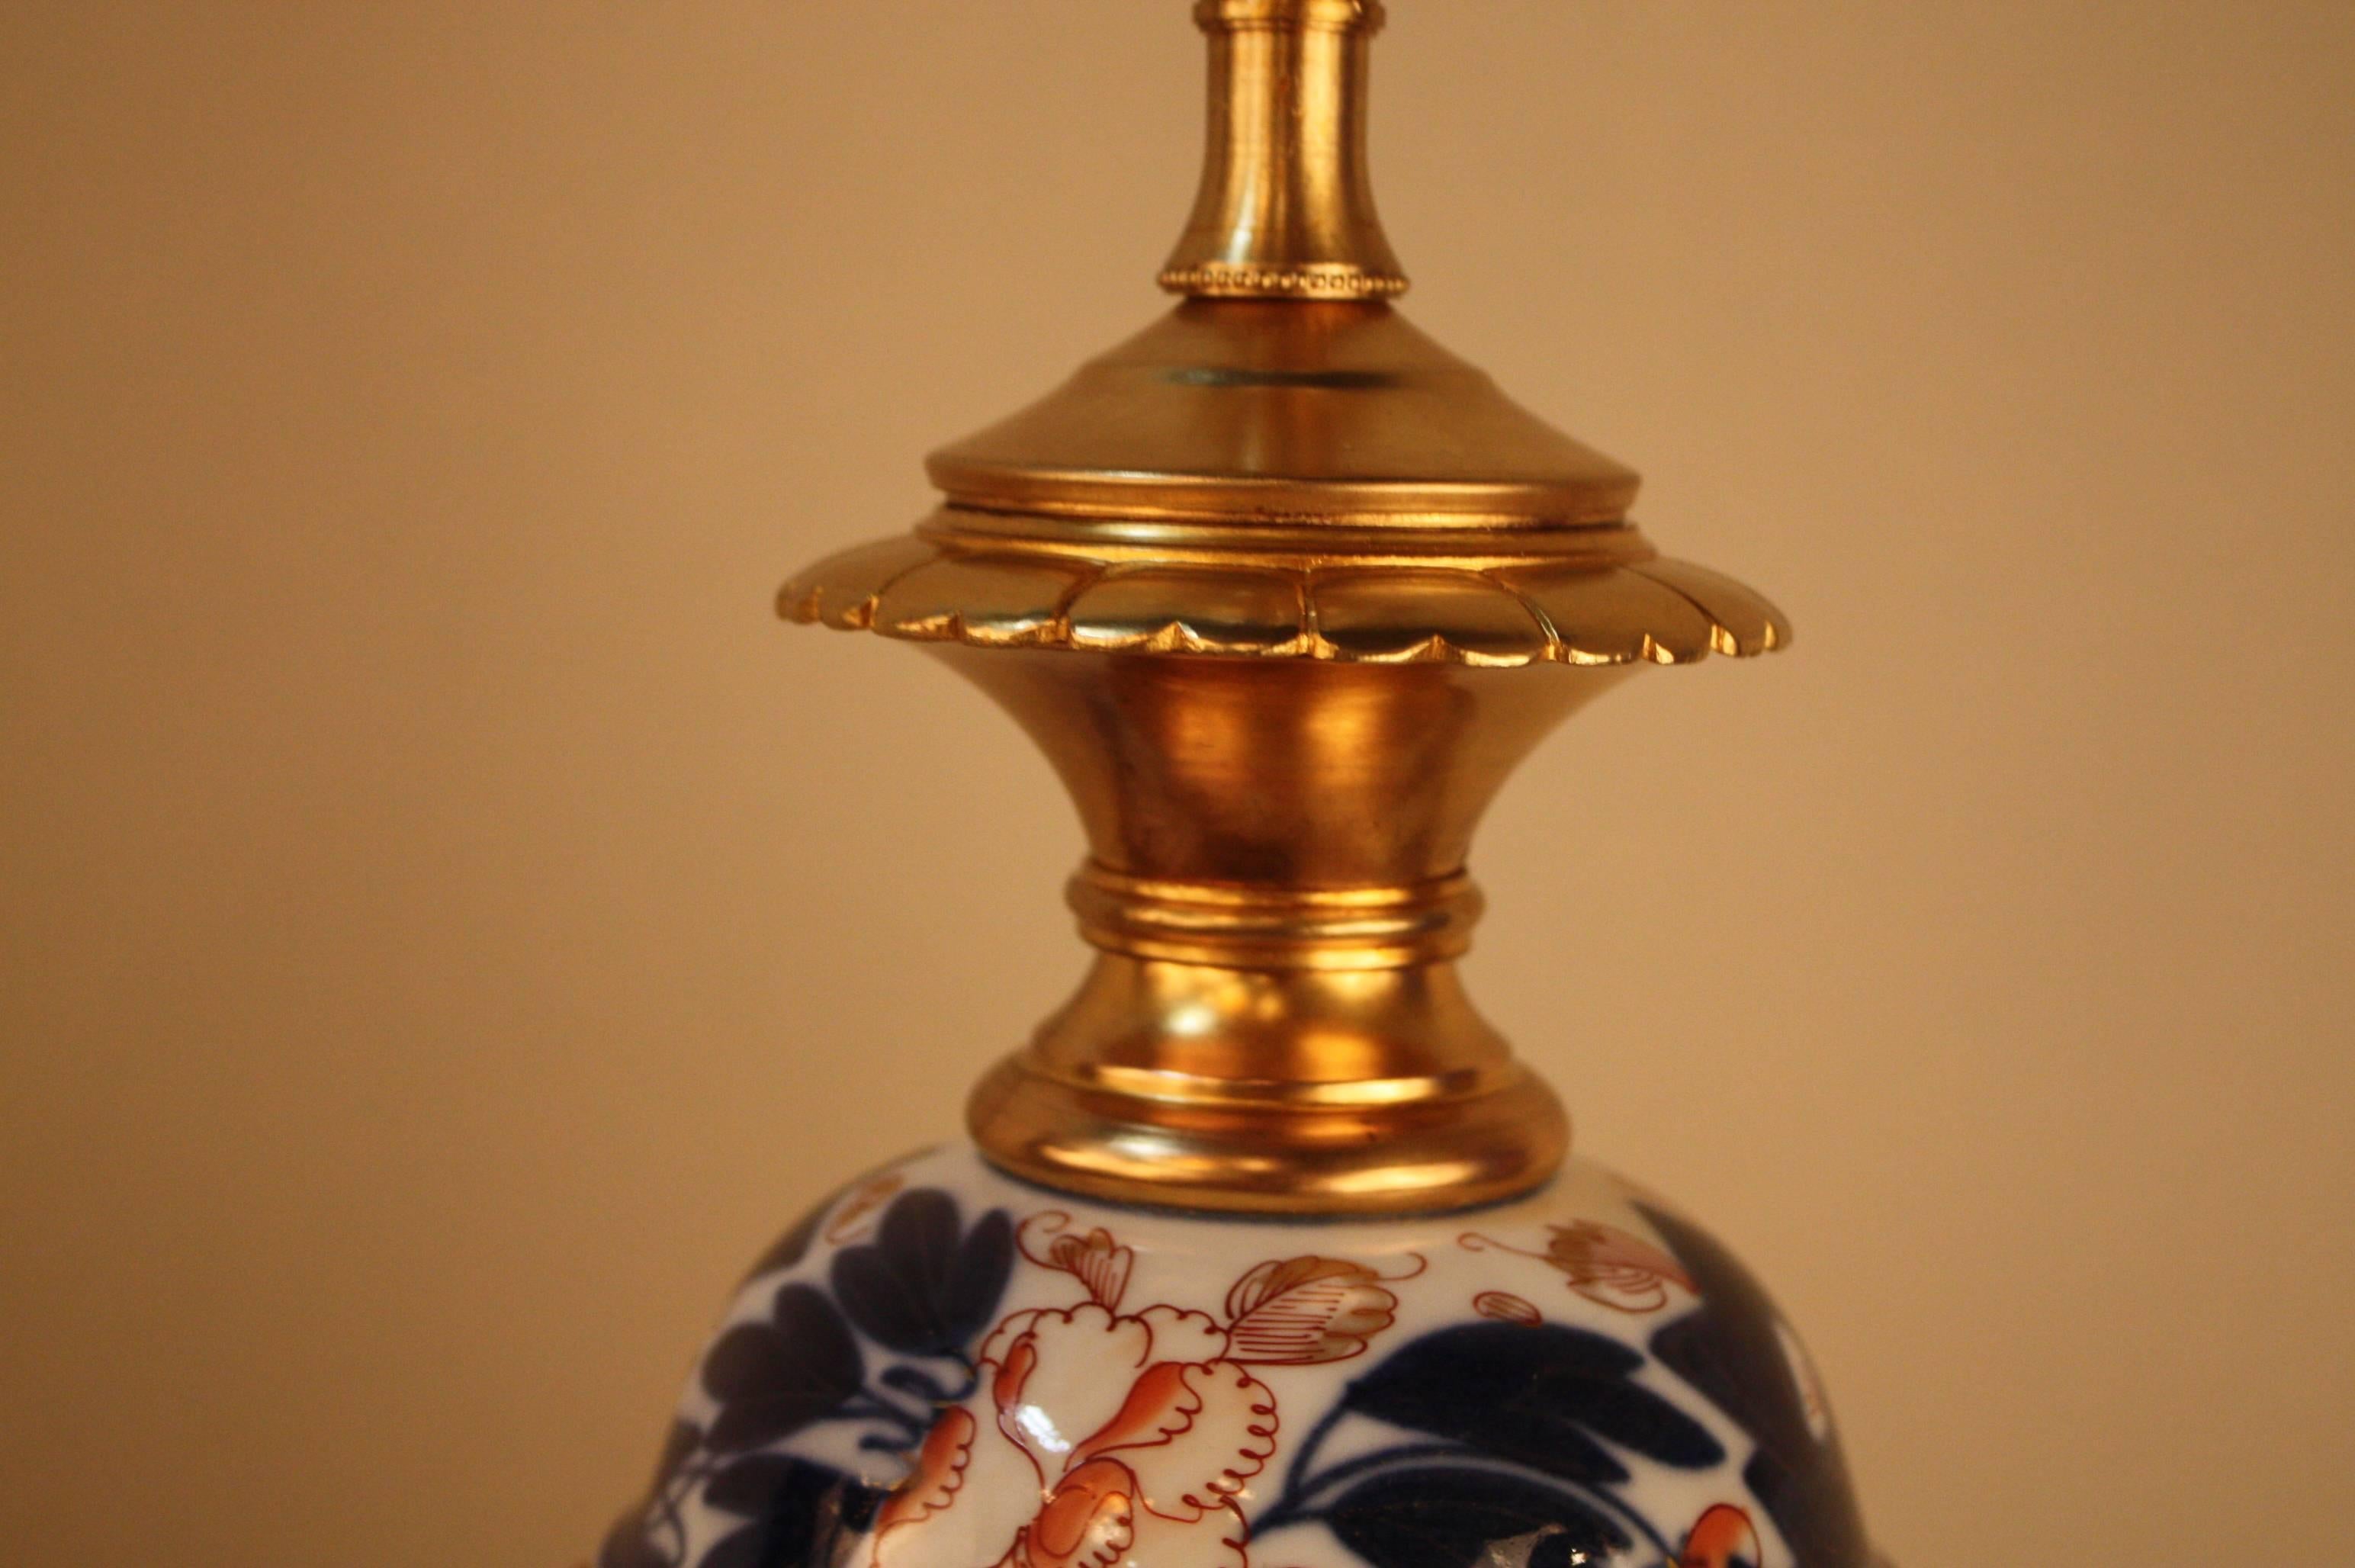 19th Century Imari Porcelain and Gilt Bronze-Mounted Electrified Oil Lamp 4